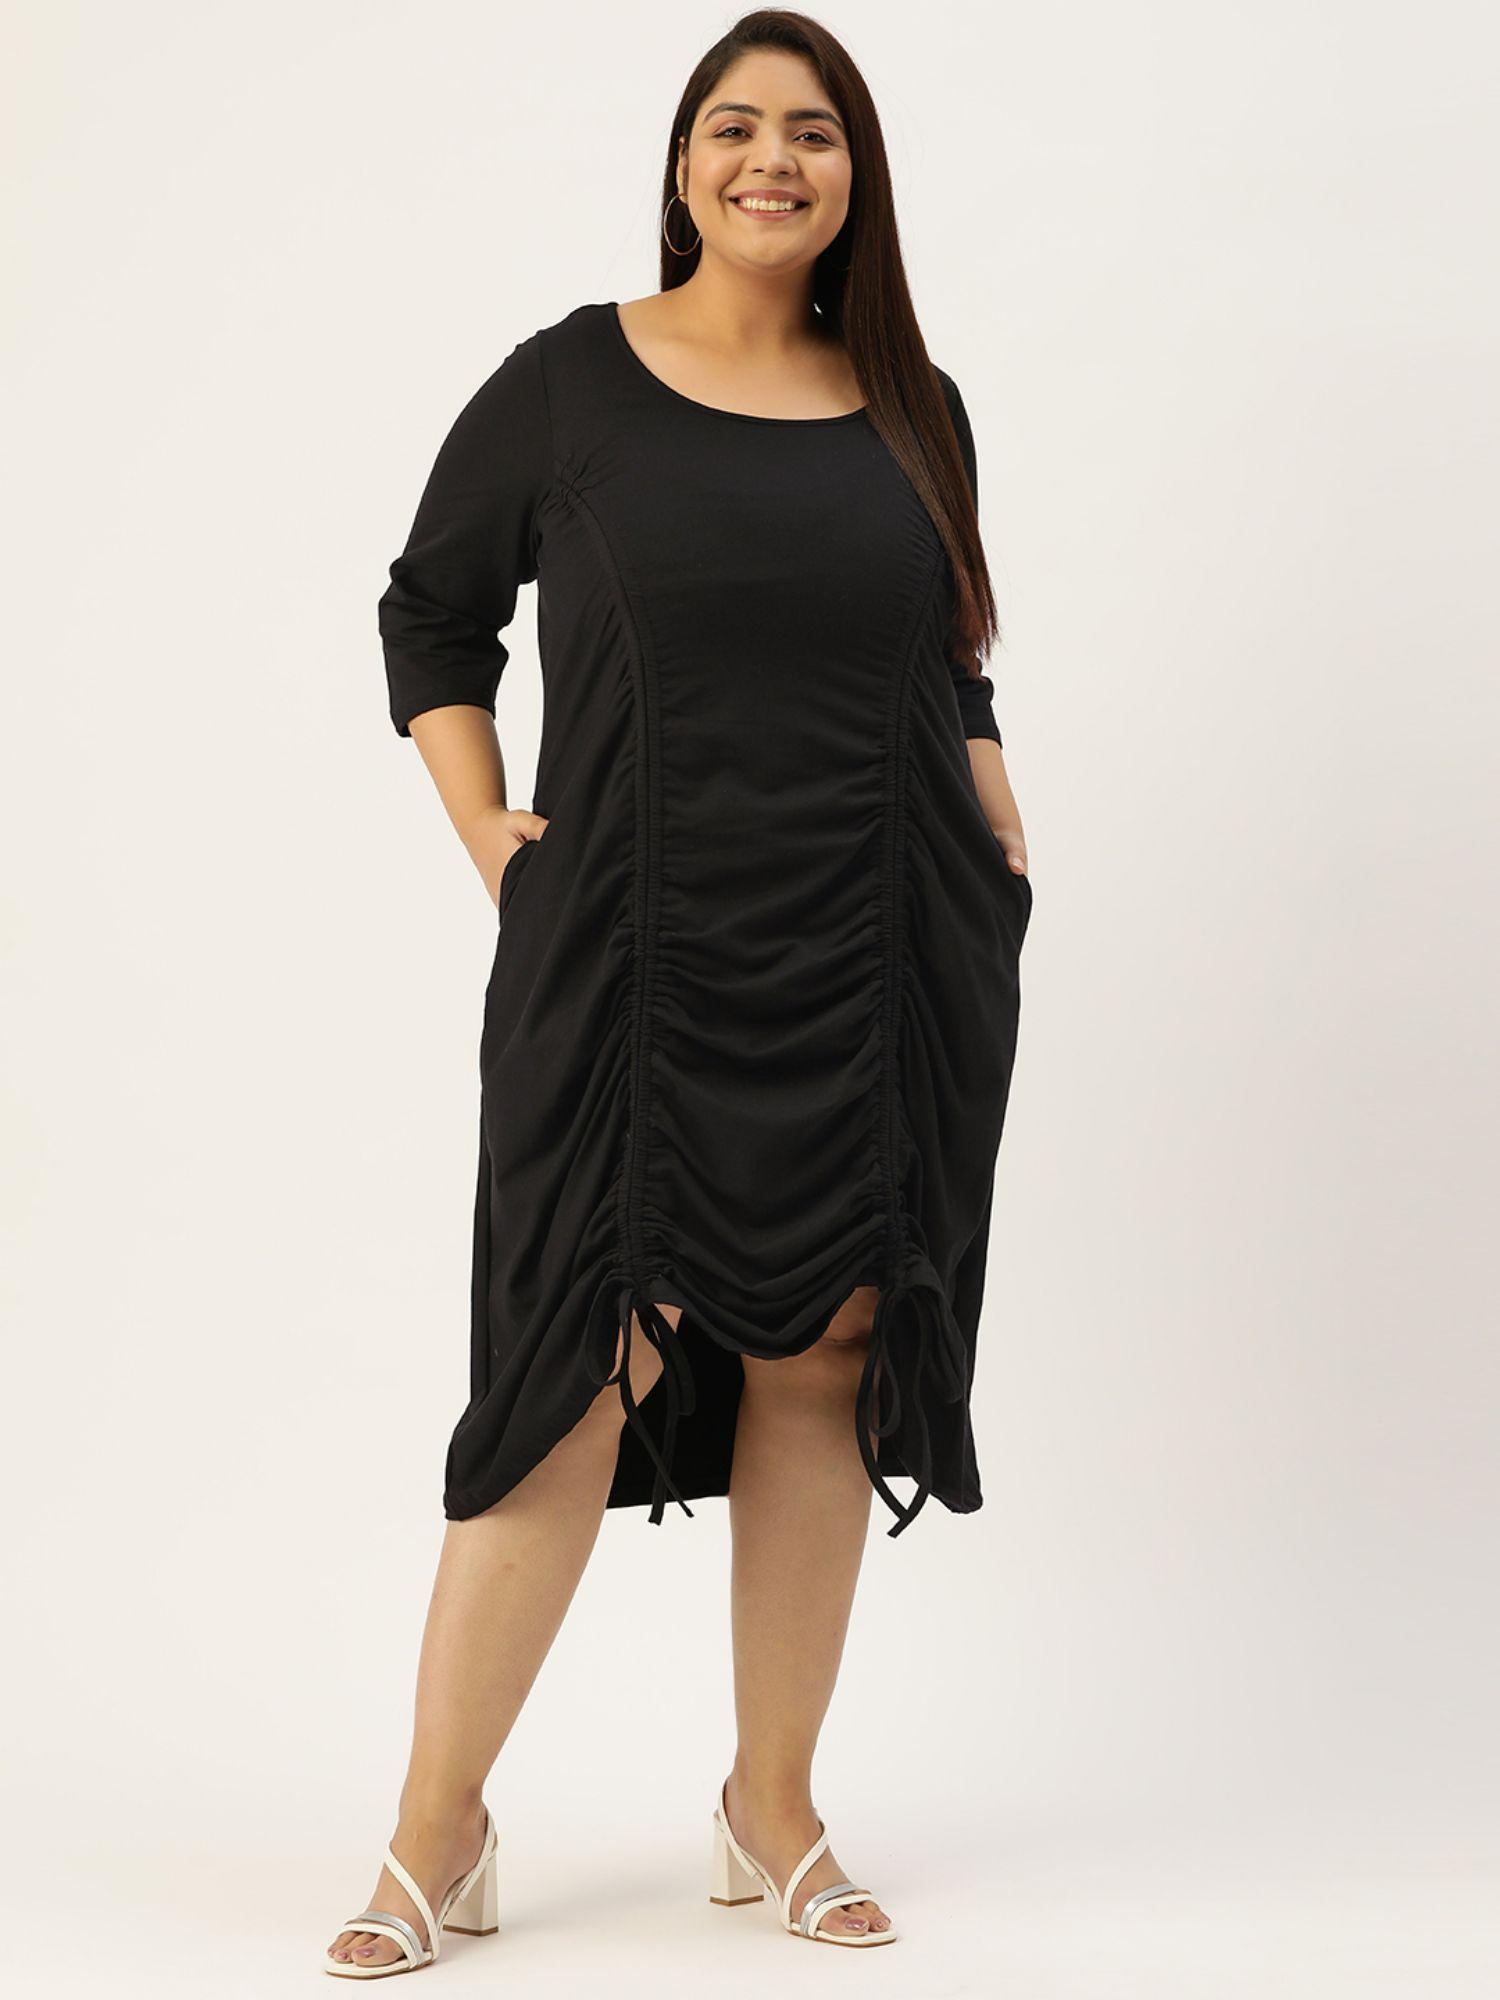 plus-size-women-black-solid-color-cotton-knitted-ruched-a-line-dress